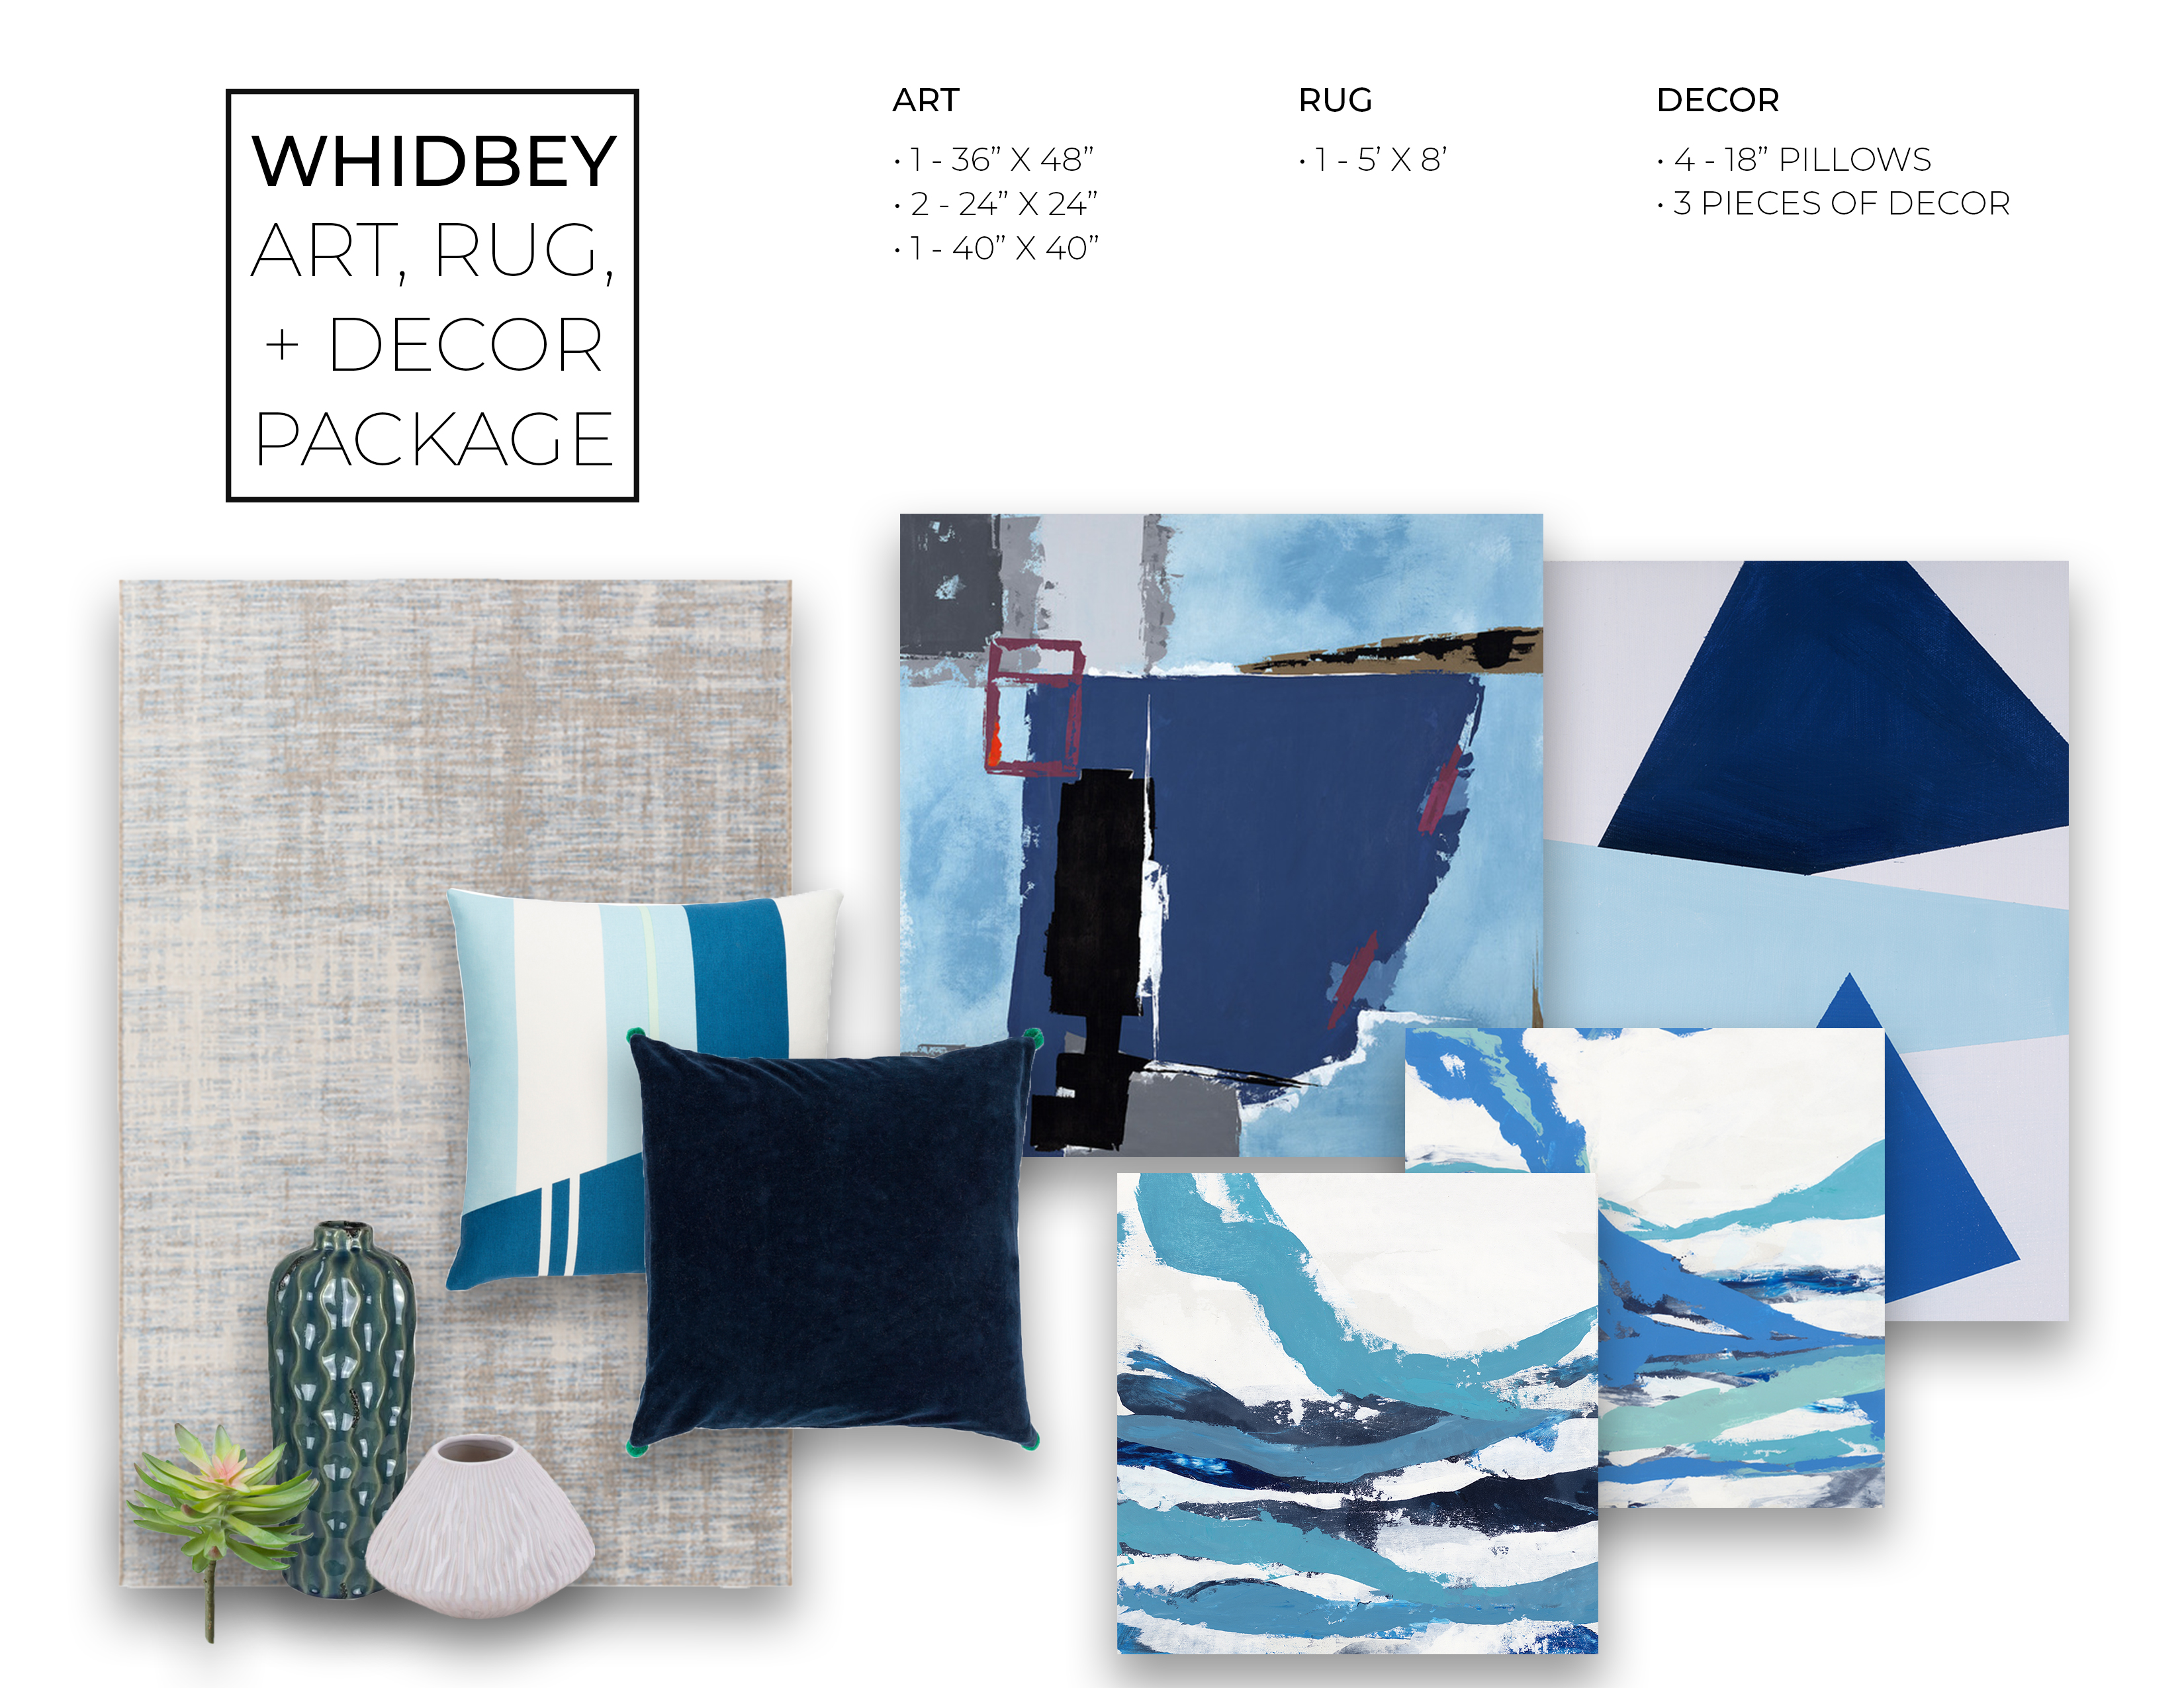 Whidbey Art, Rug, + Decor Package